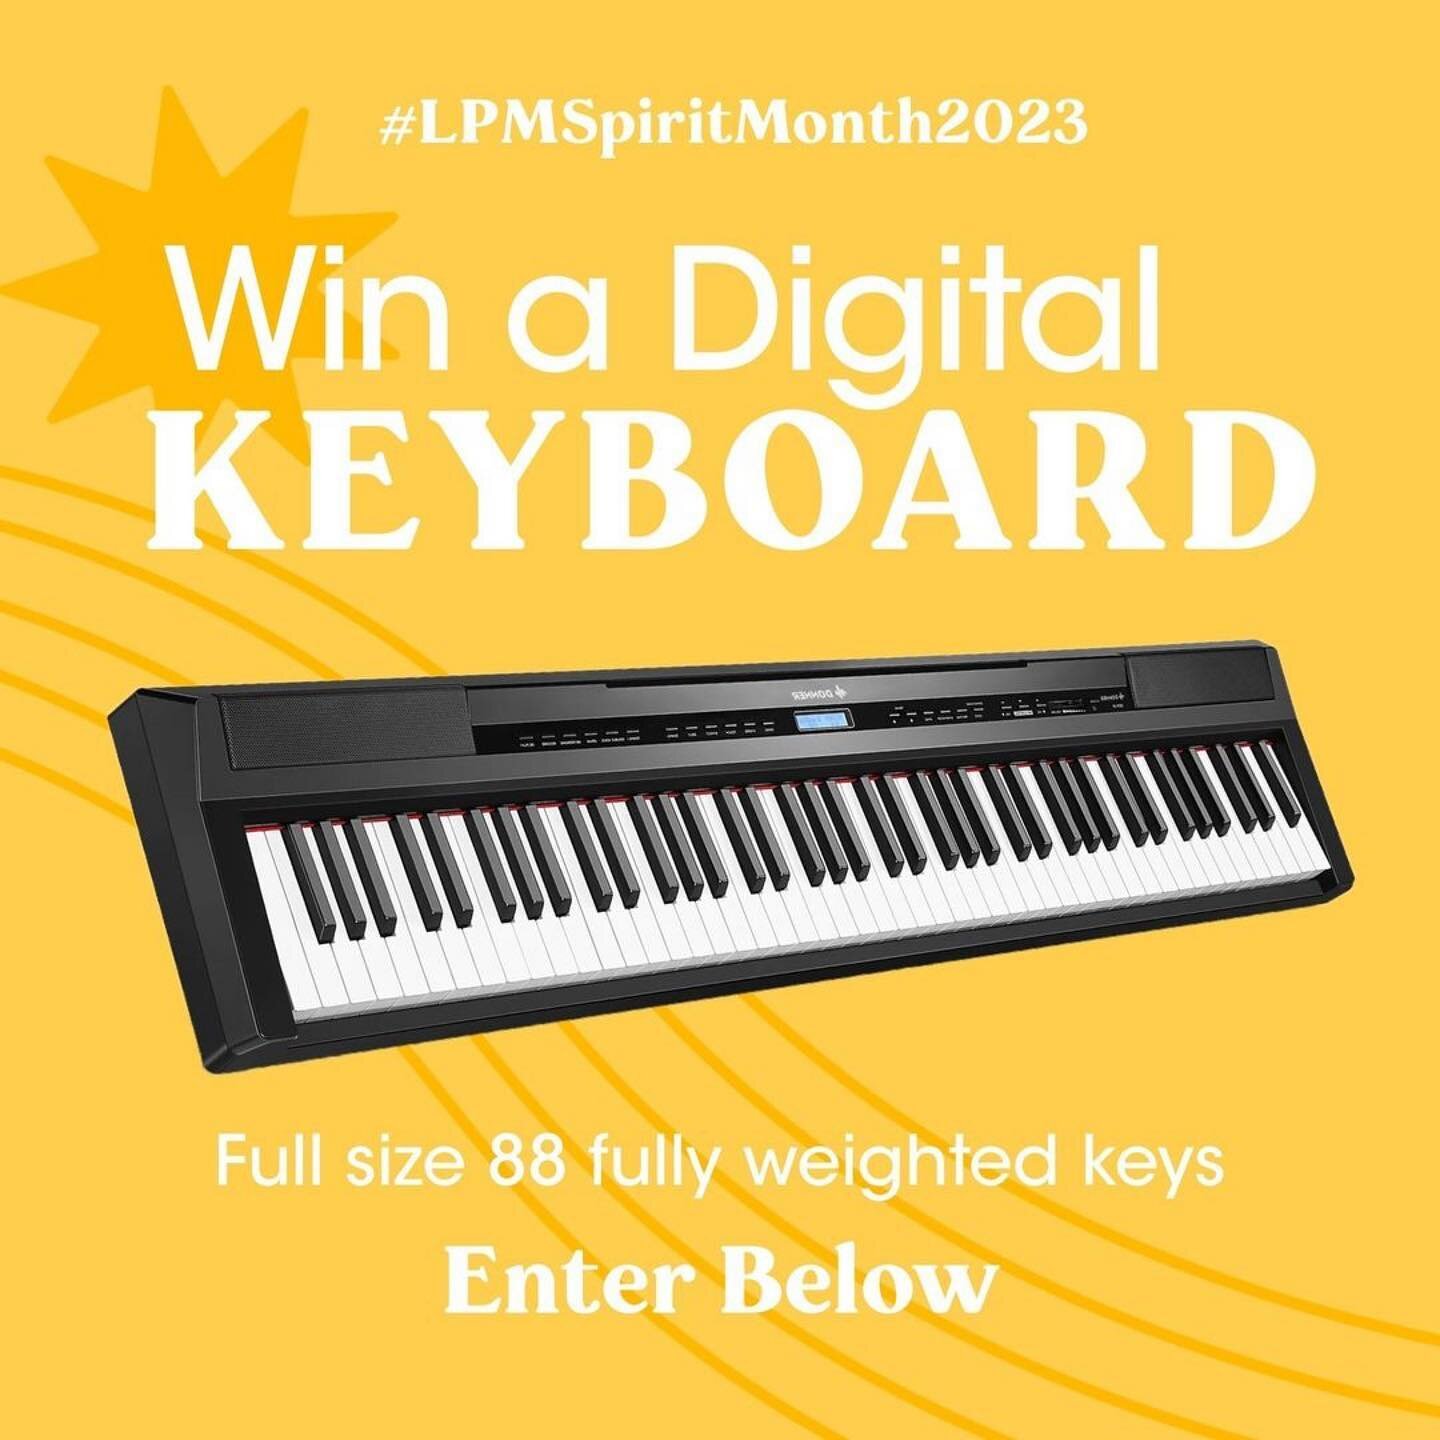 #Repost @letsplaymusic_official
・・・
We are so excited for our final giveaway of Spirit Month, a brand new, full size, 88 key digital keyboard! 

Here are your requirements to enter:

1️⃣Like this post

2️⃣Tag at least 3 friends below 
(more friends =